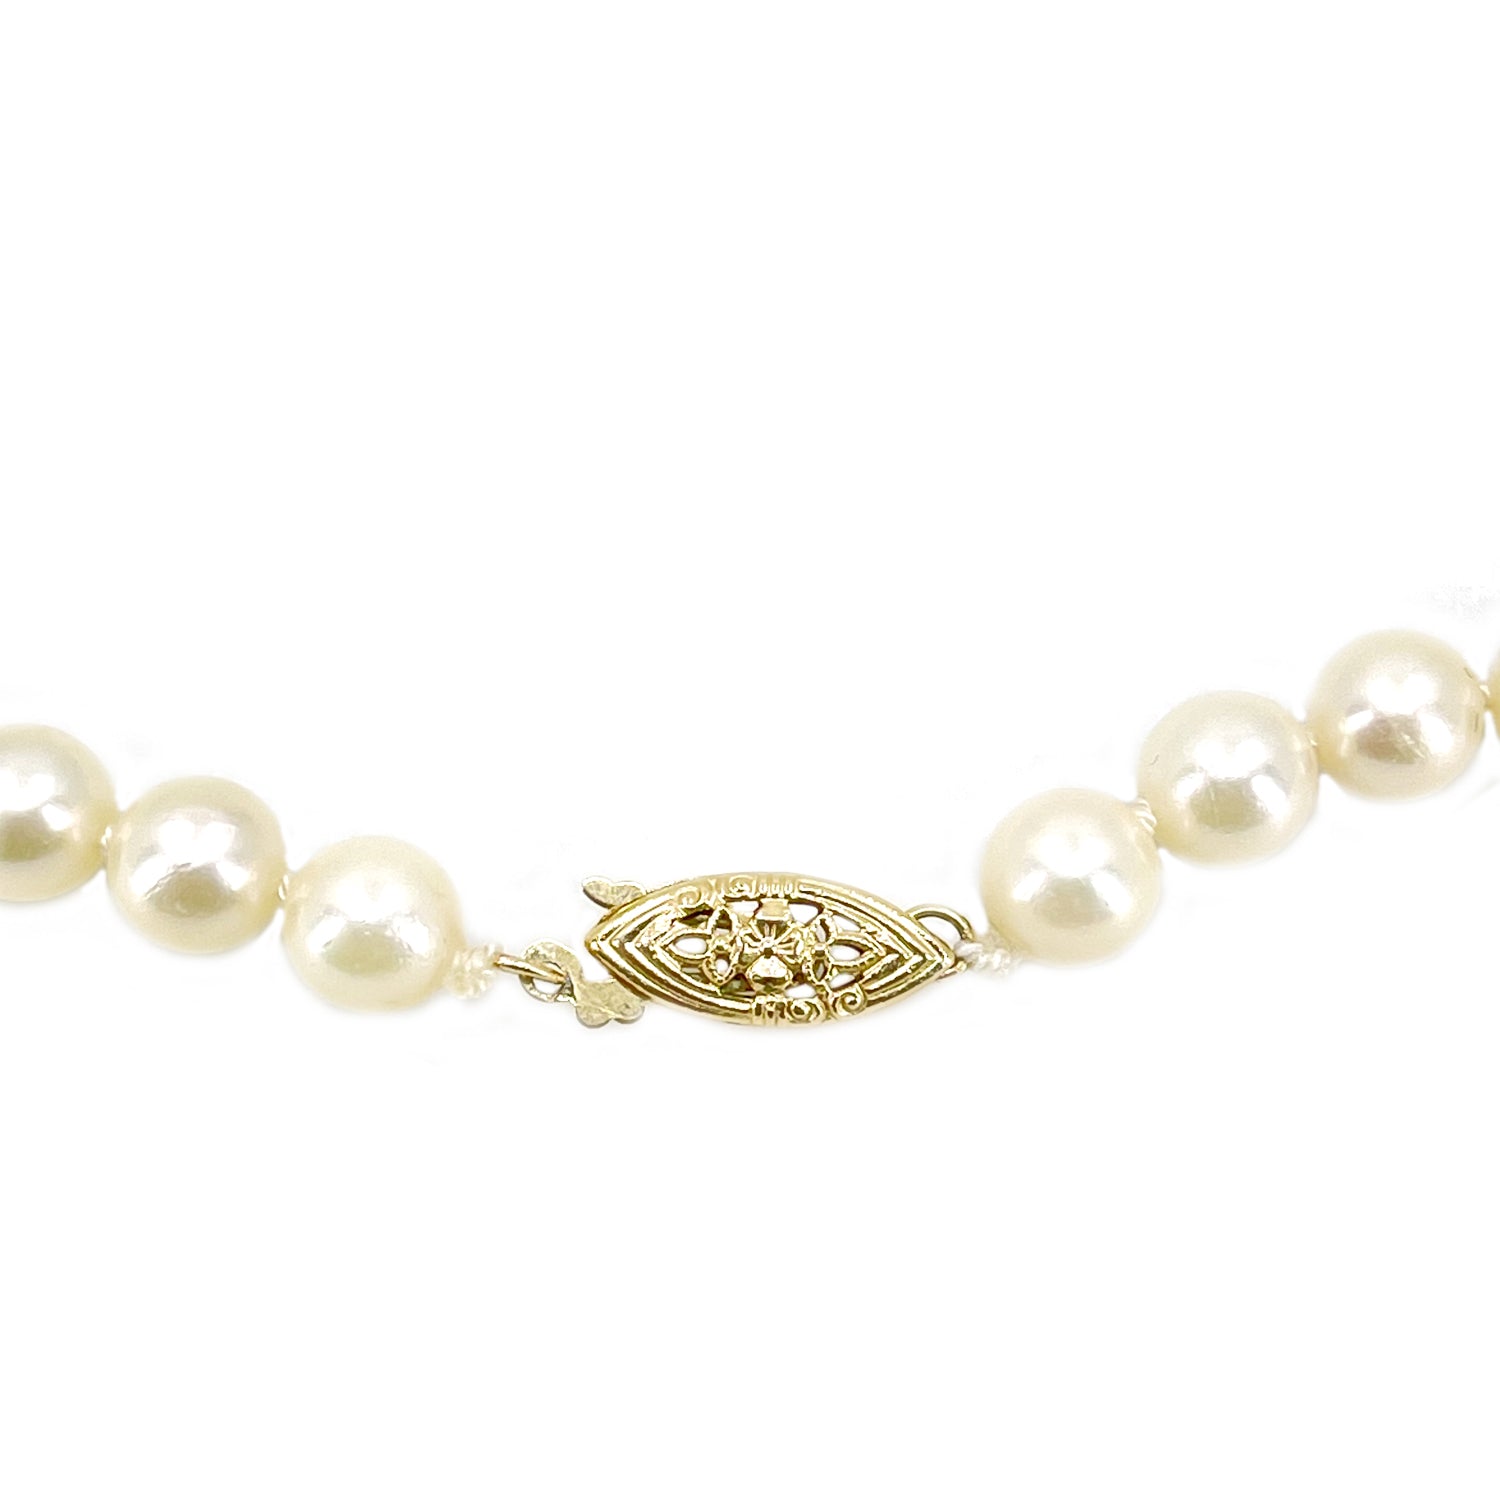 Murata Vintage Japanese Cultured Akoya Pearl Strand Necklace Box- 14K Yellow Gold 17.75 Inch